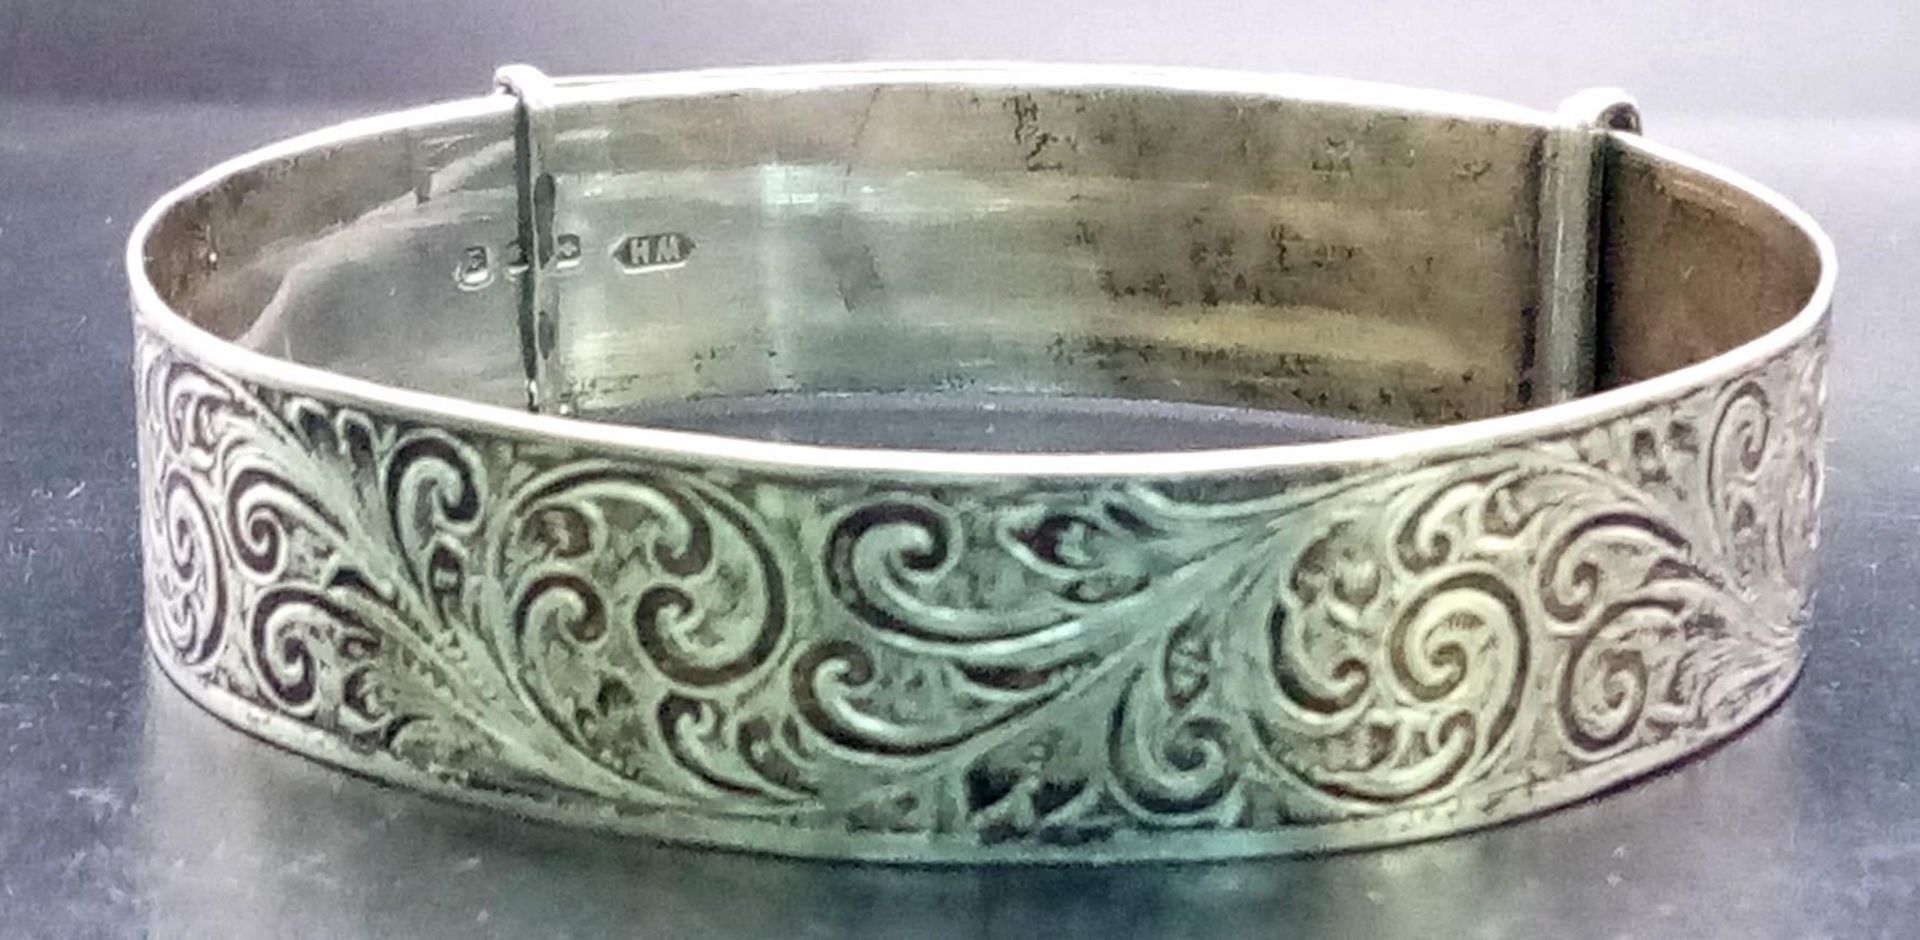 A vintage sterling silver adjustable bangle with fabulous engravings. Come with full London